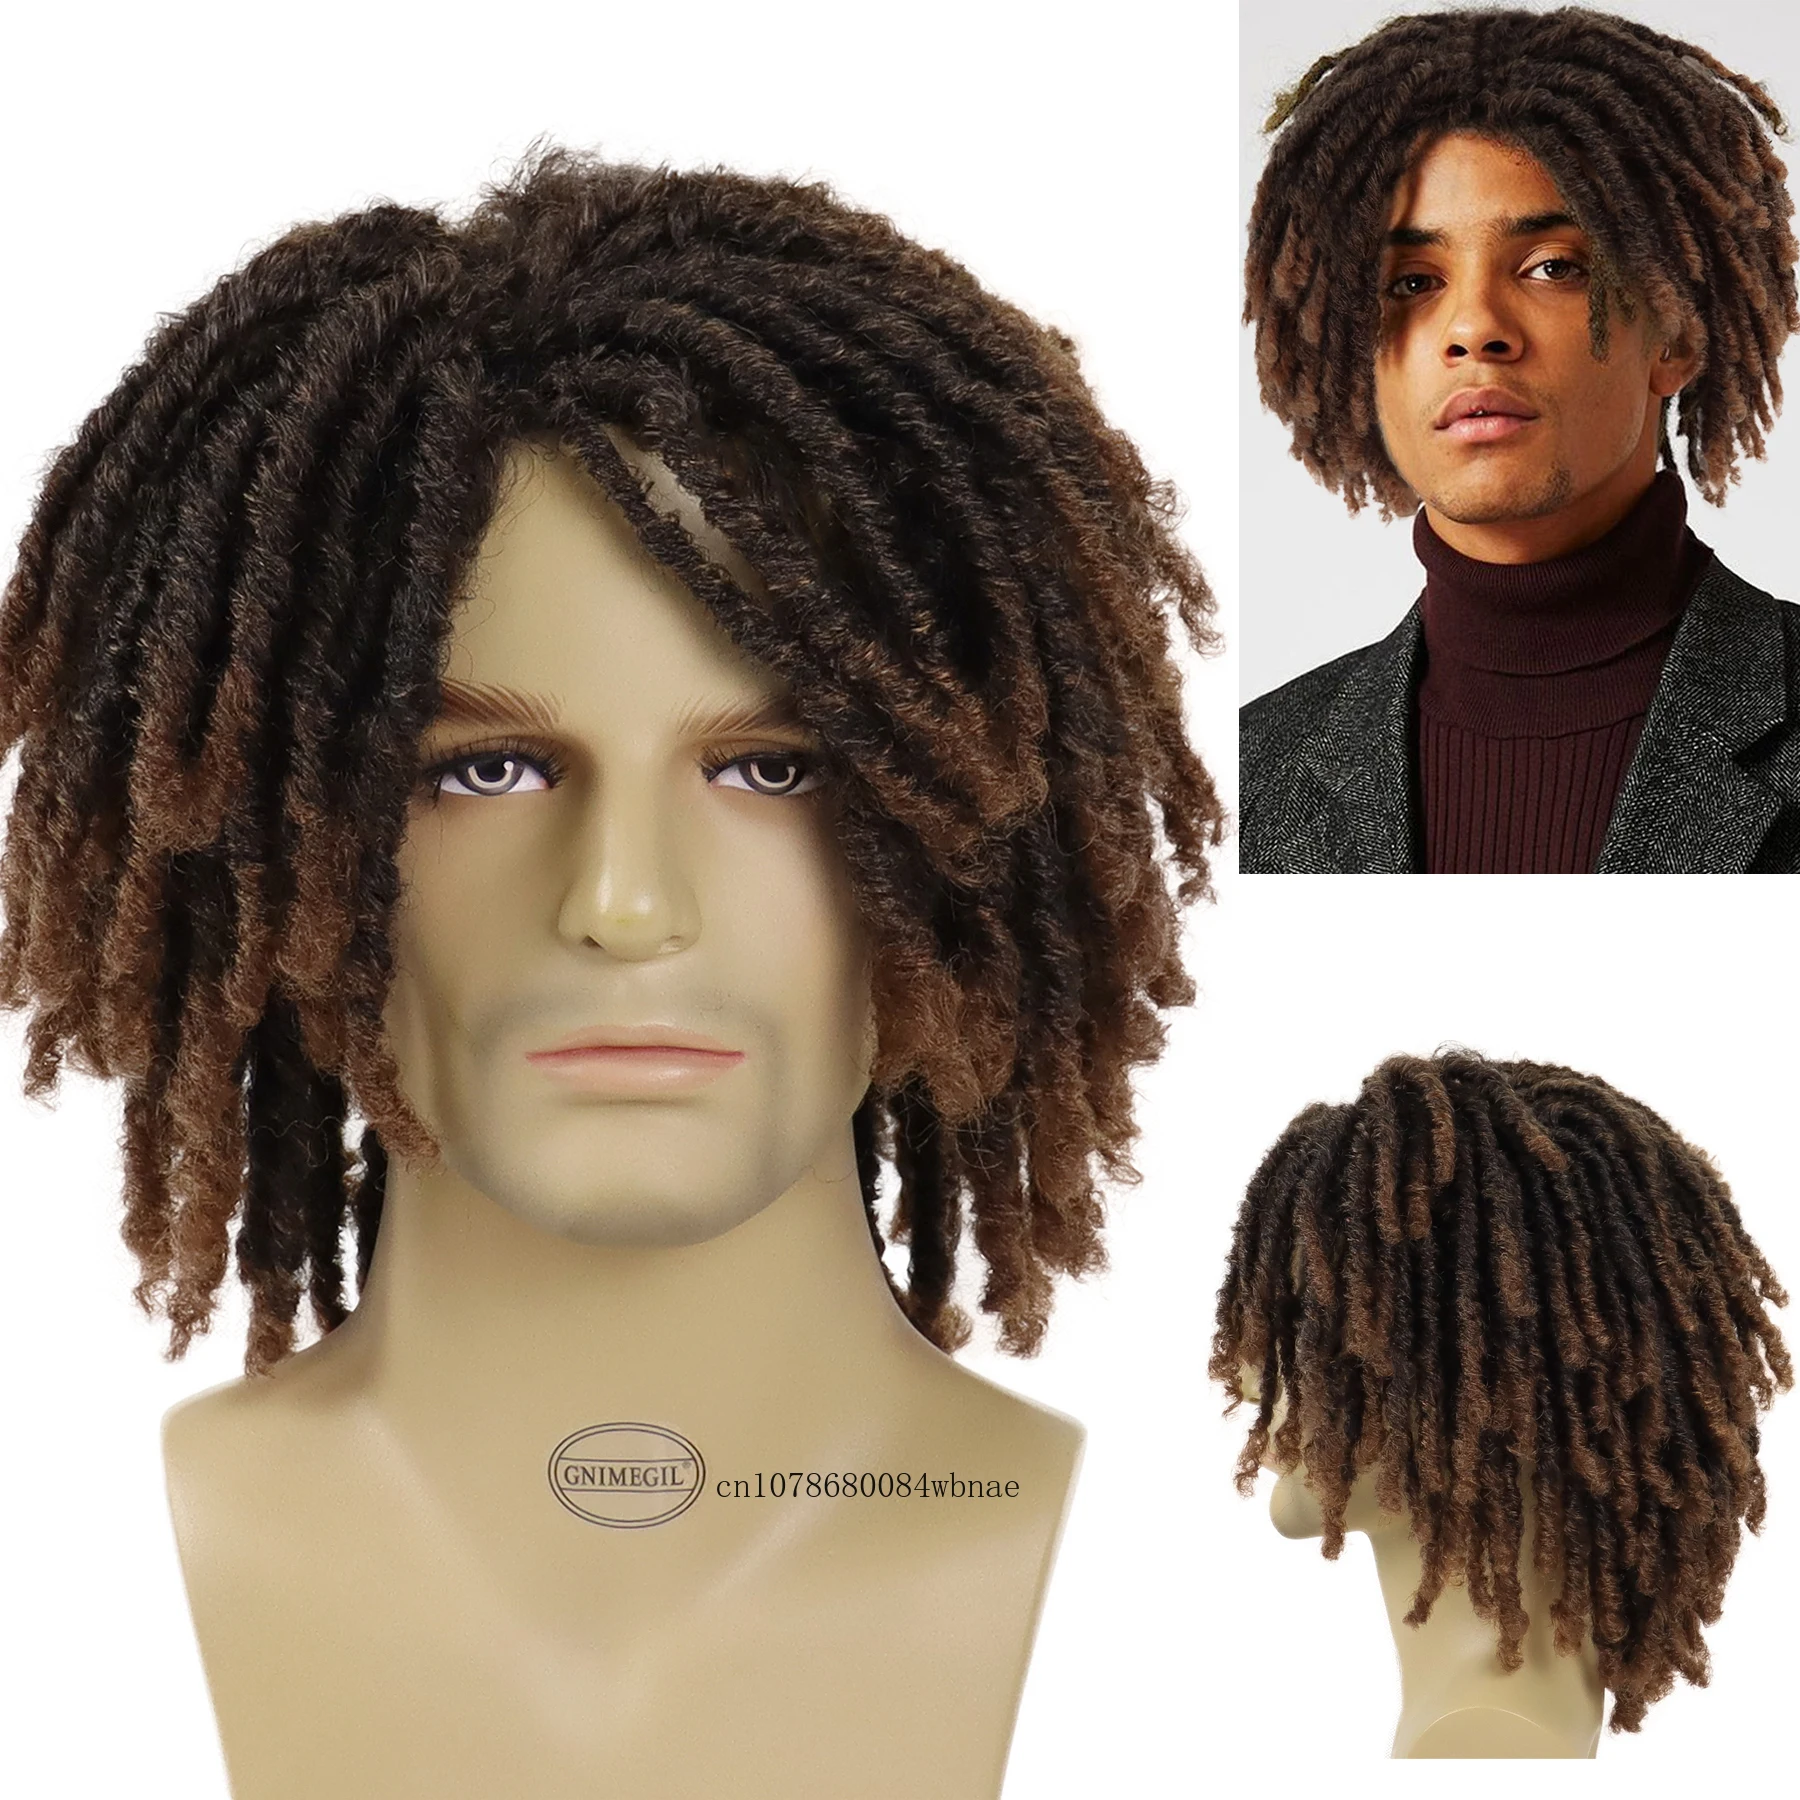 

Short Dreadlocks Synthetic Ombre Brown Crochet Twist Hair Braided Wigs Afro Bob Curly Men Wig Daily Party Use Heat Resistant